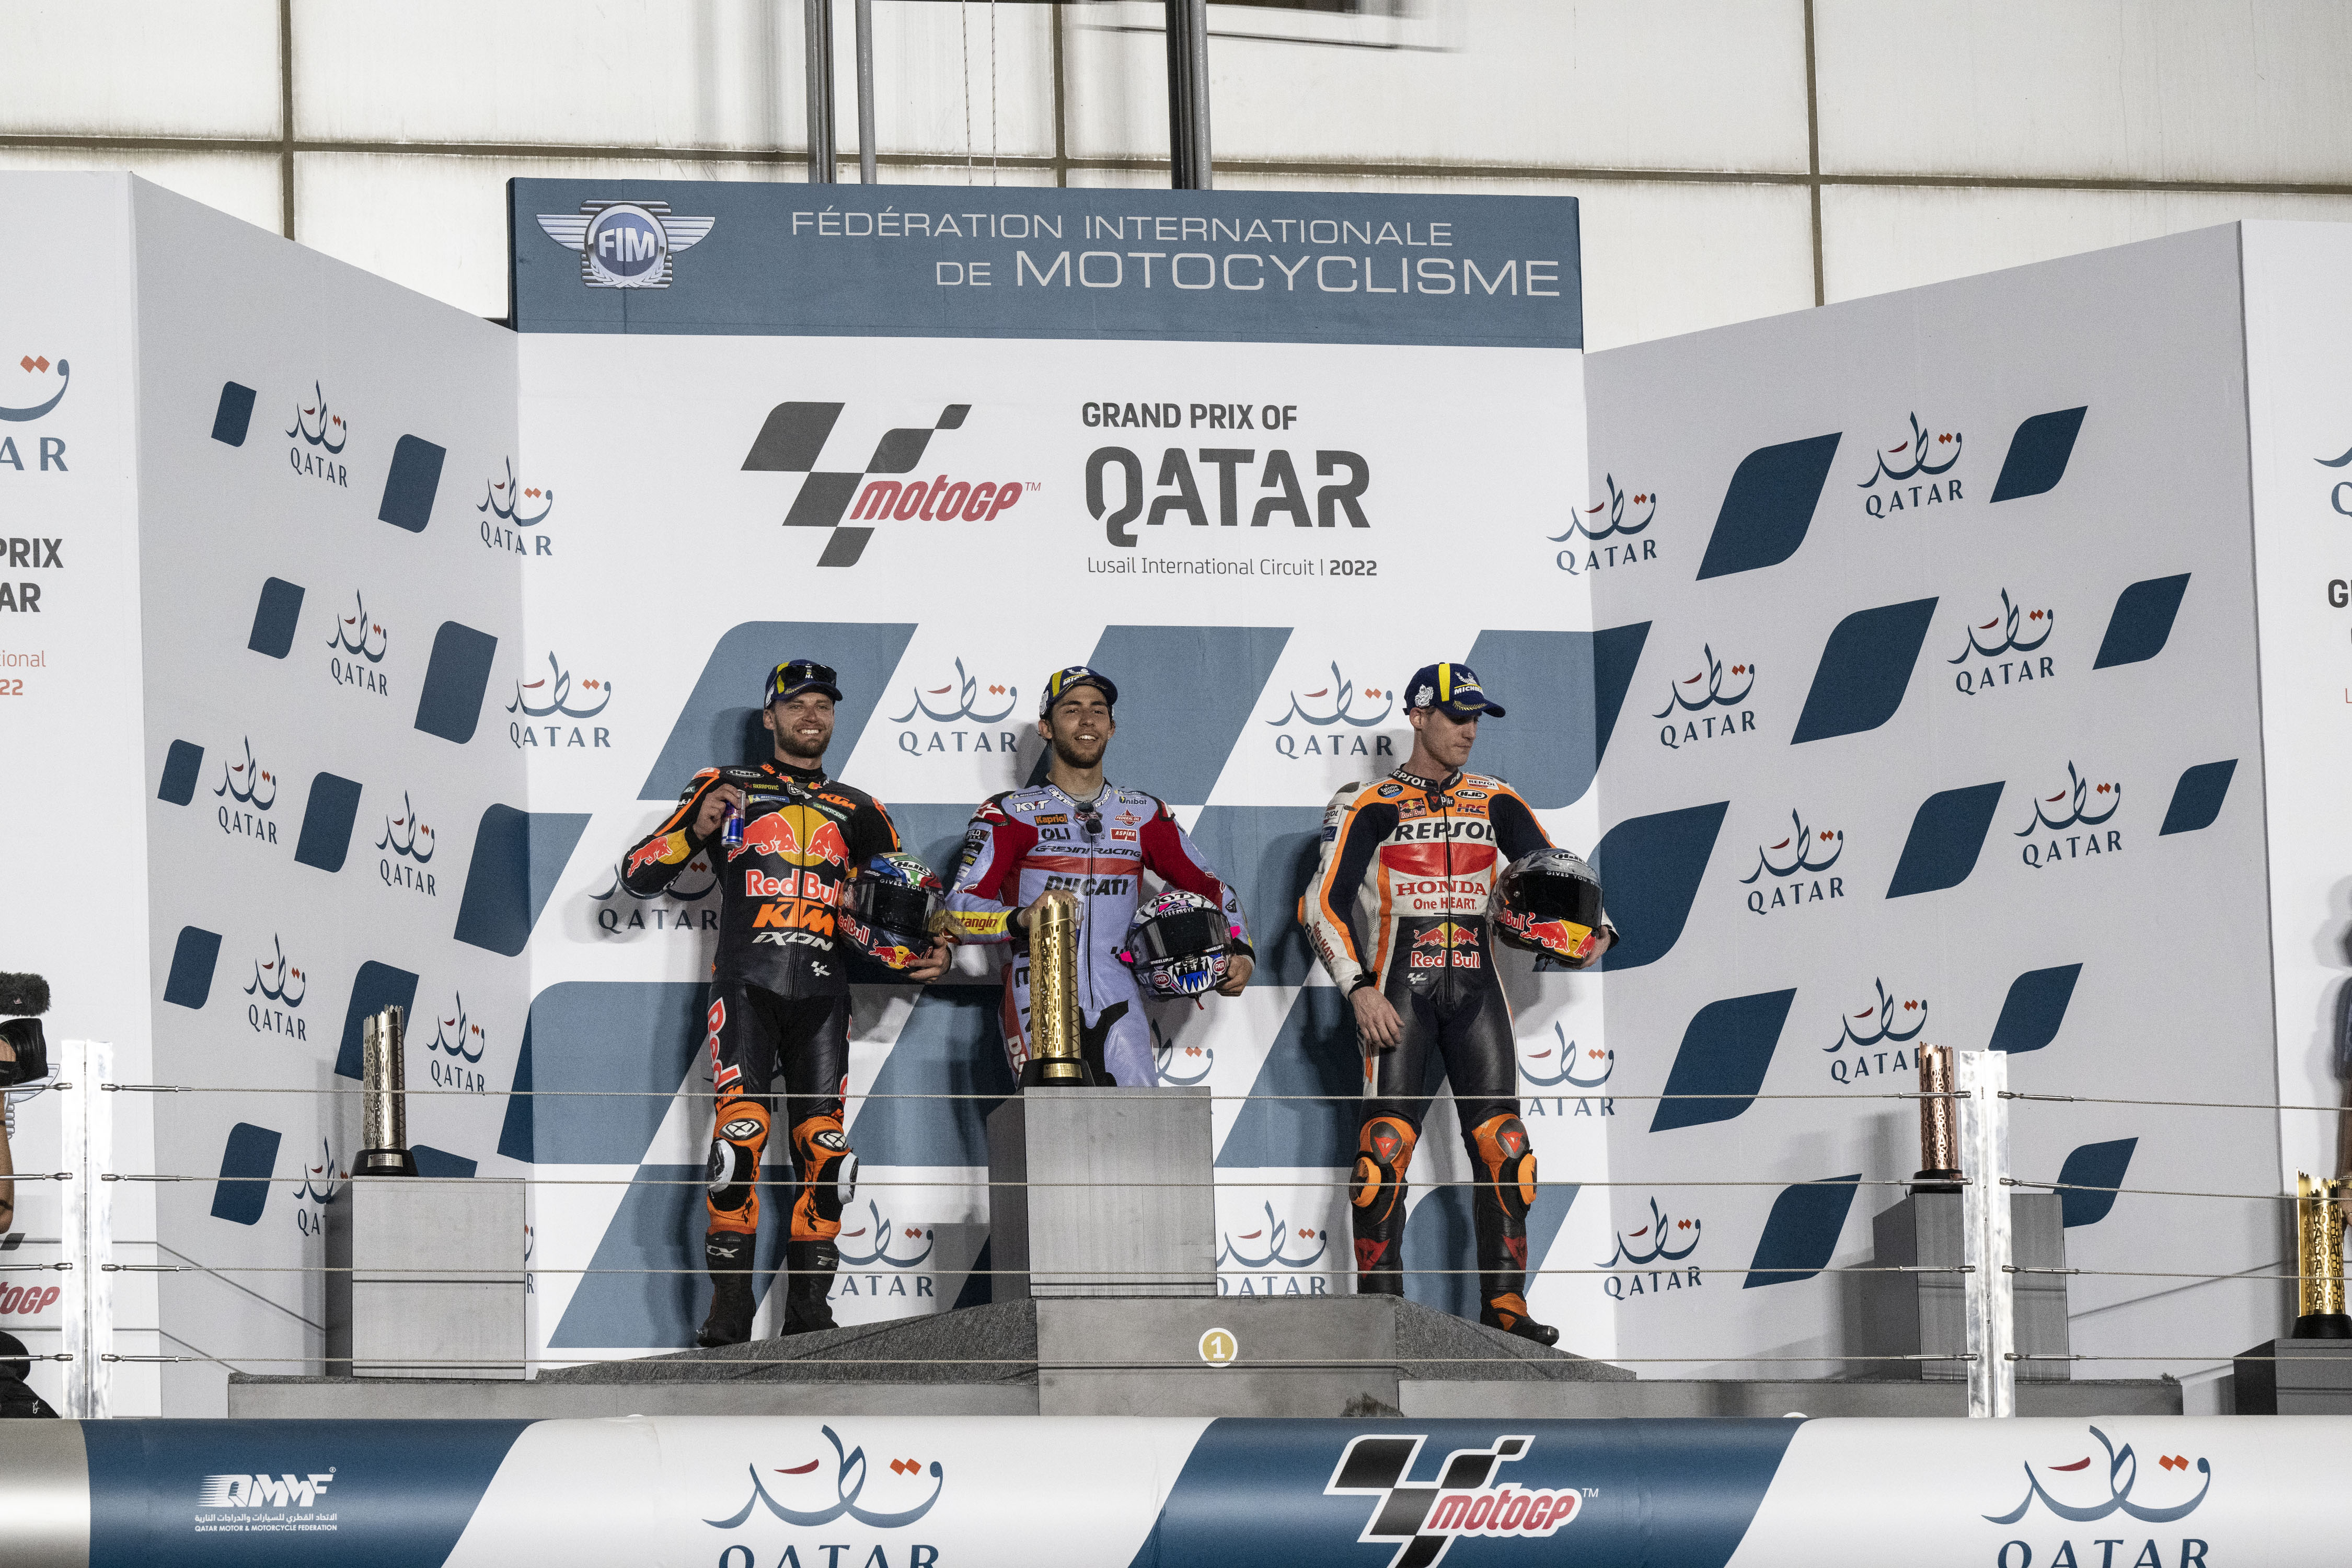 As Riders Claim their Prizes, the Circuit Steals the Spotlight